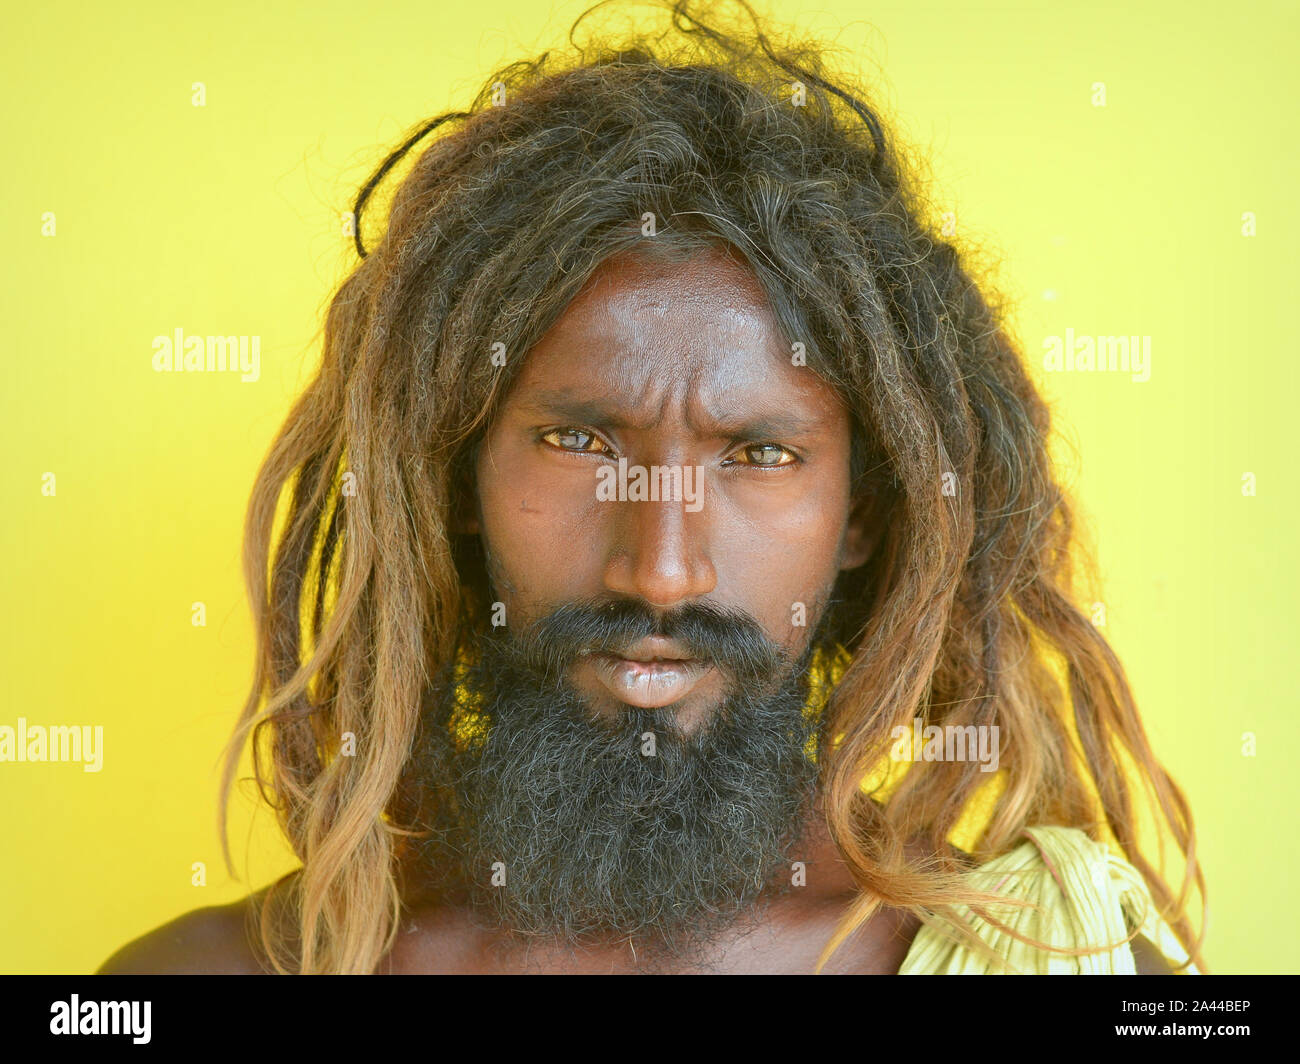 Scruffy low-caste Tamil beggar with dreadlocks and black beard poses for the camera. Stock Photo